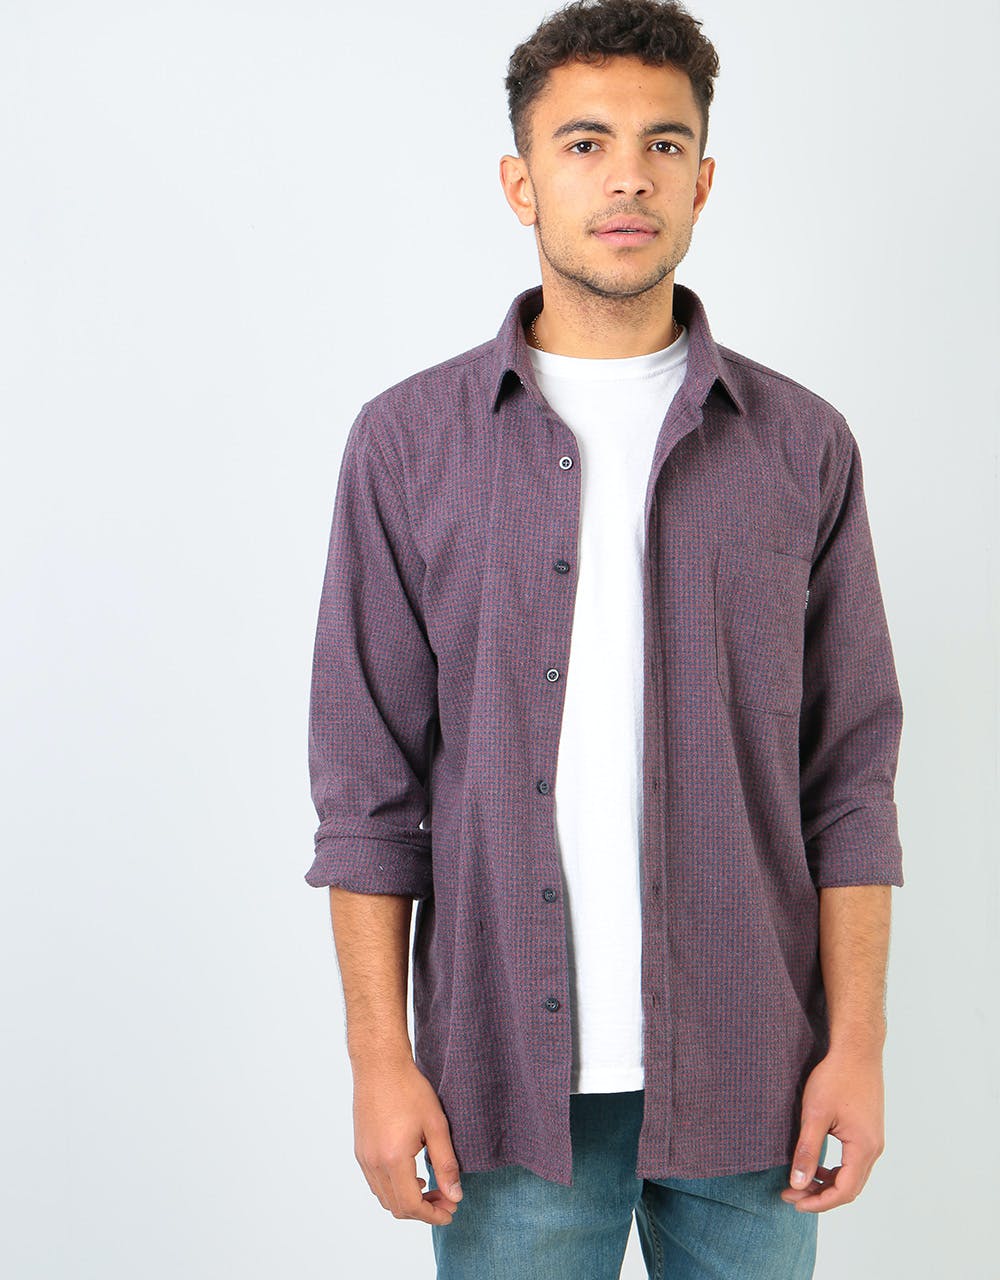 Route One Hounds Flannel Shirt - Cardinal